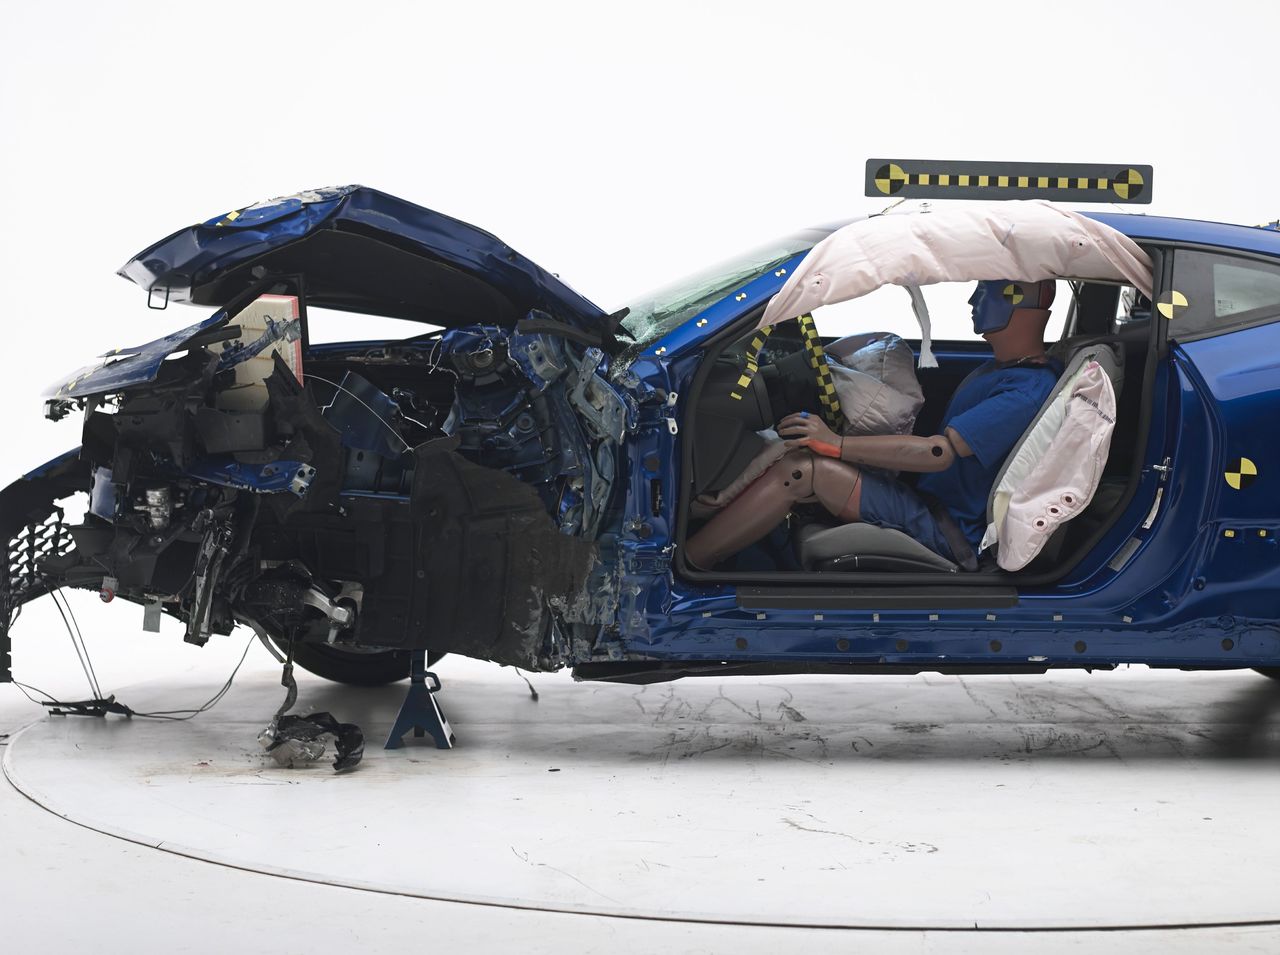 This March 24 photo shows a 2016 Chevrolet Camaro after a crash test at the Insurance Institute for Highway Safety’s Vehicle Research Center in Ruckersville, Virginia.